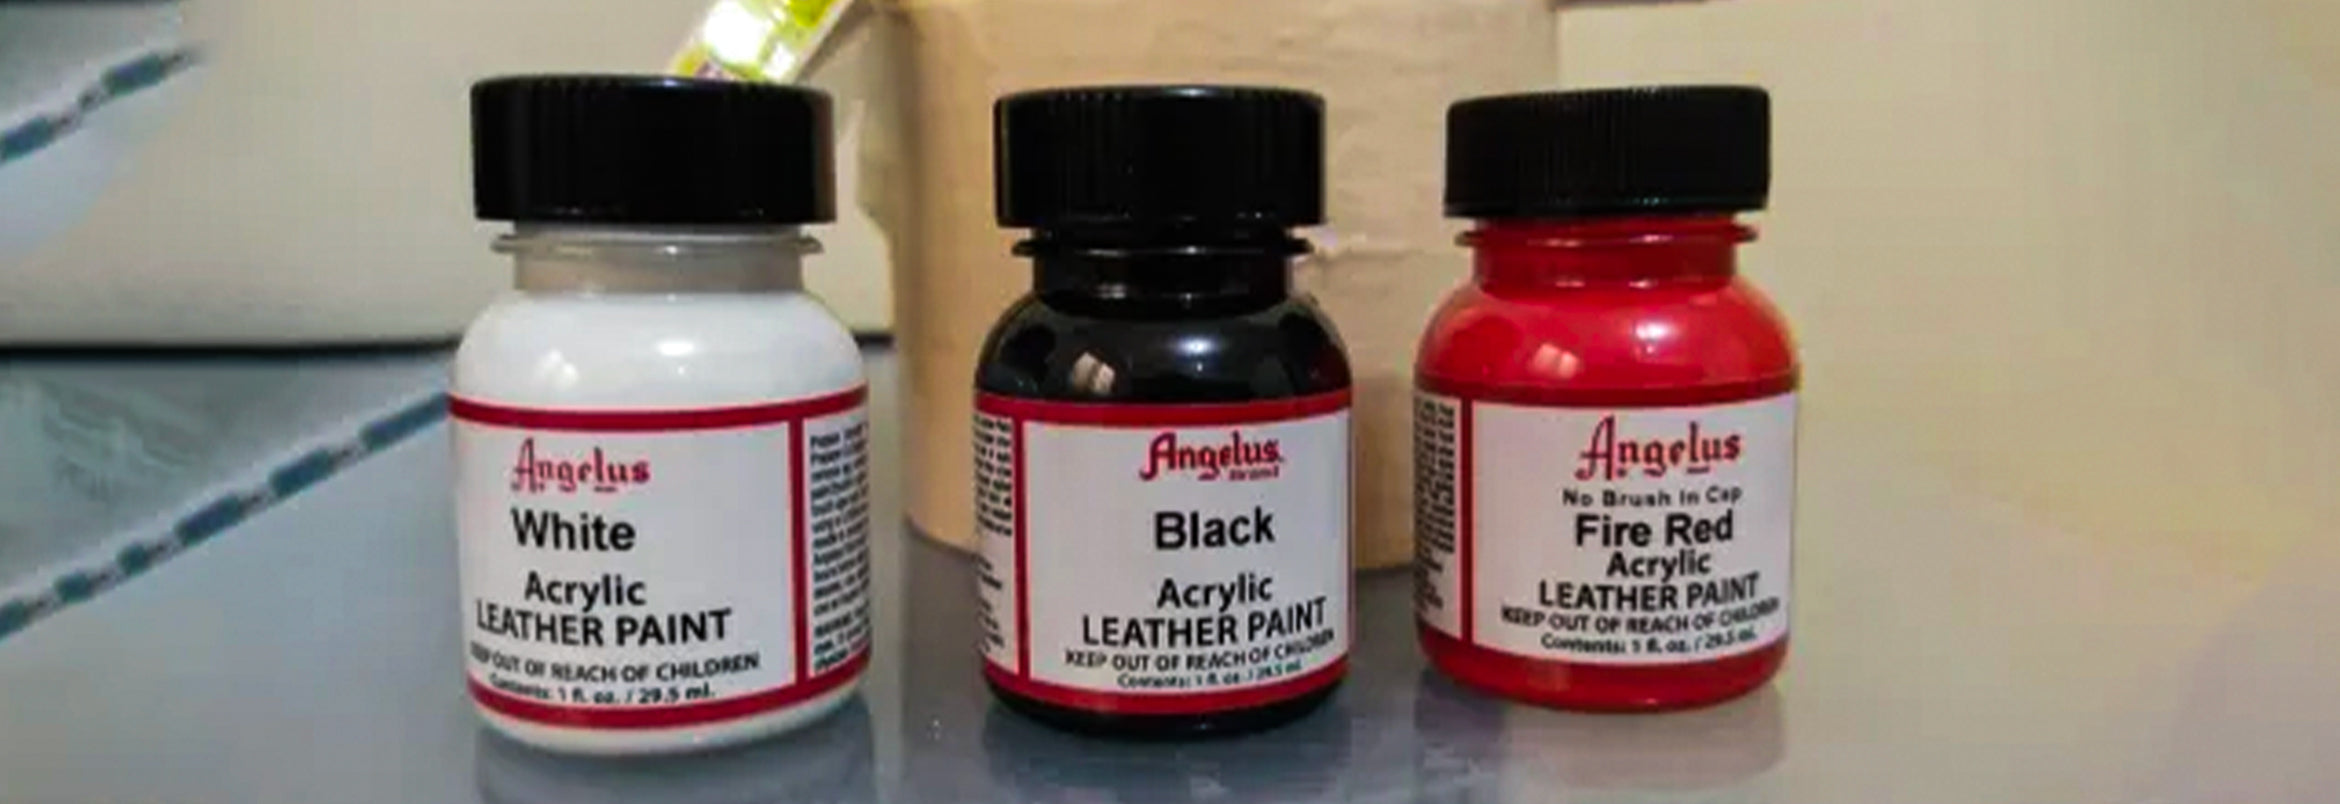 The Many Leather Paint Uses for Home, Auto, and Fashion